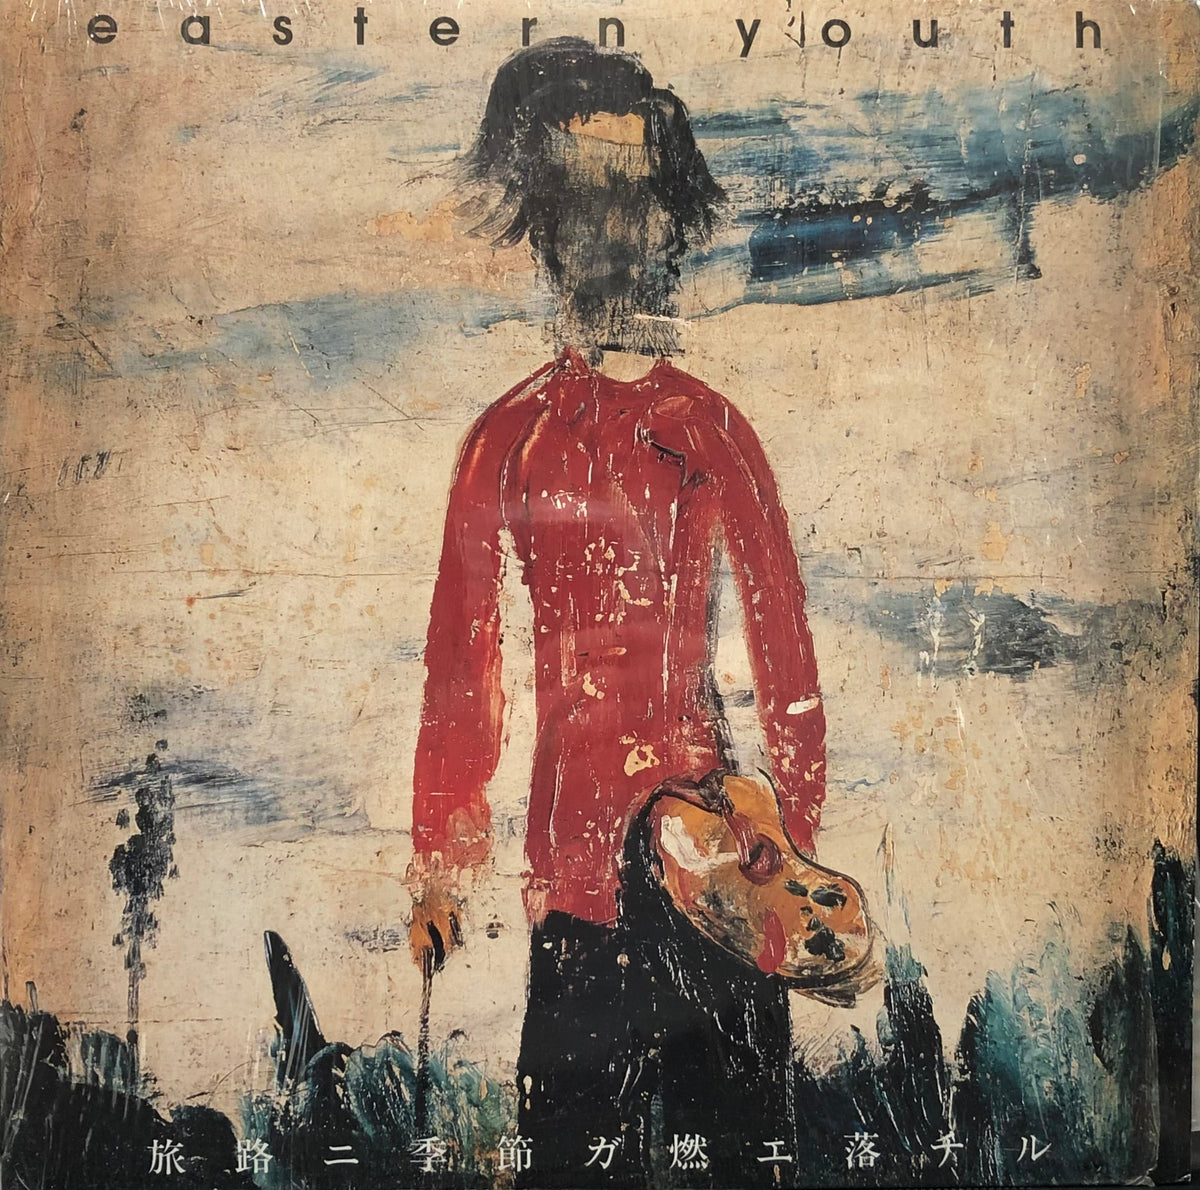 EASTERN YOUTH / 旅路ニ季節ガ燃エ落チル LP – TICRO MARKET